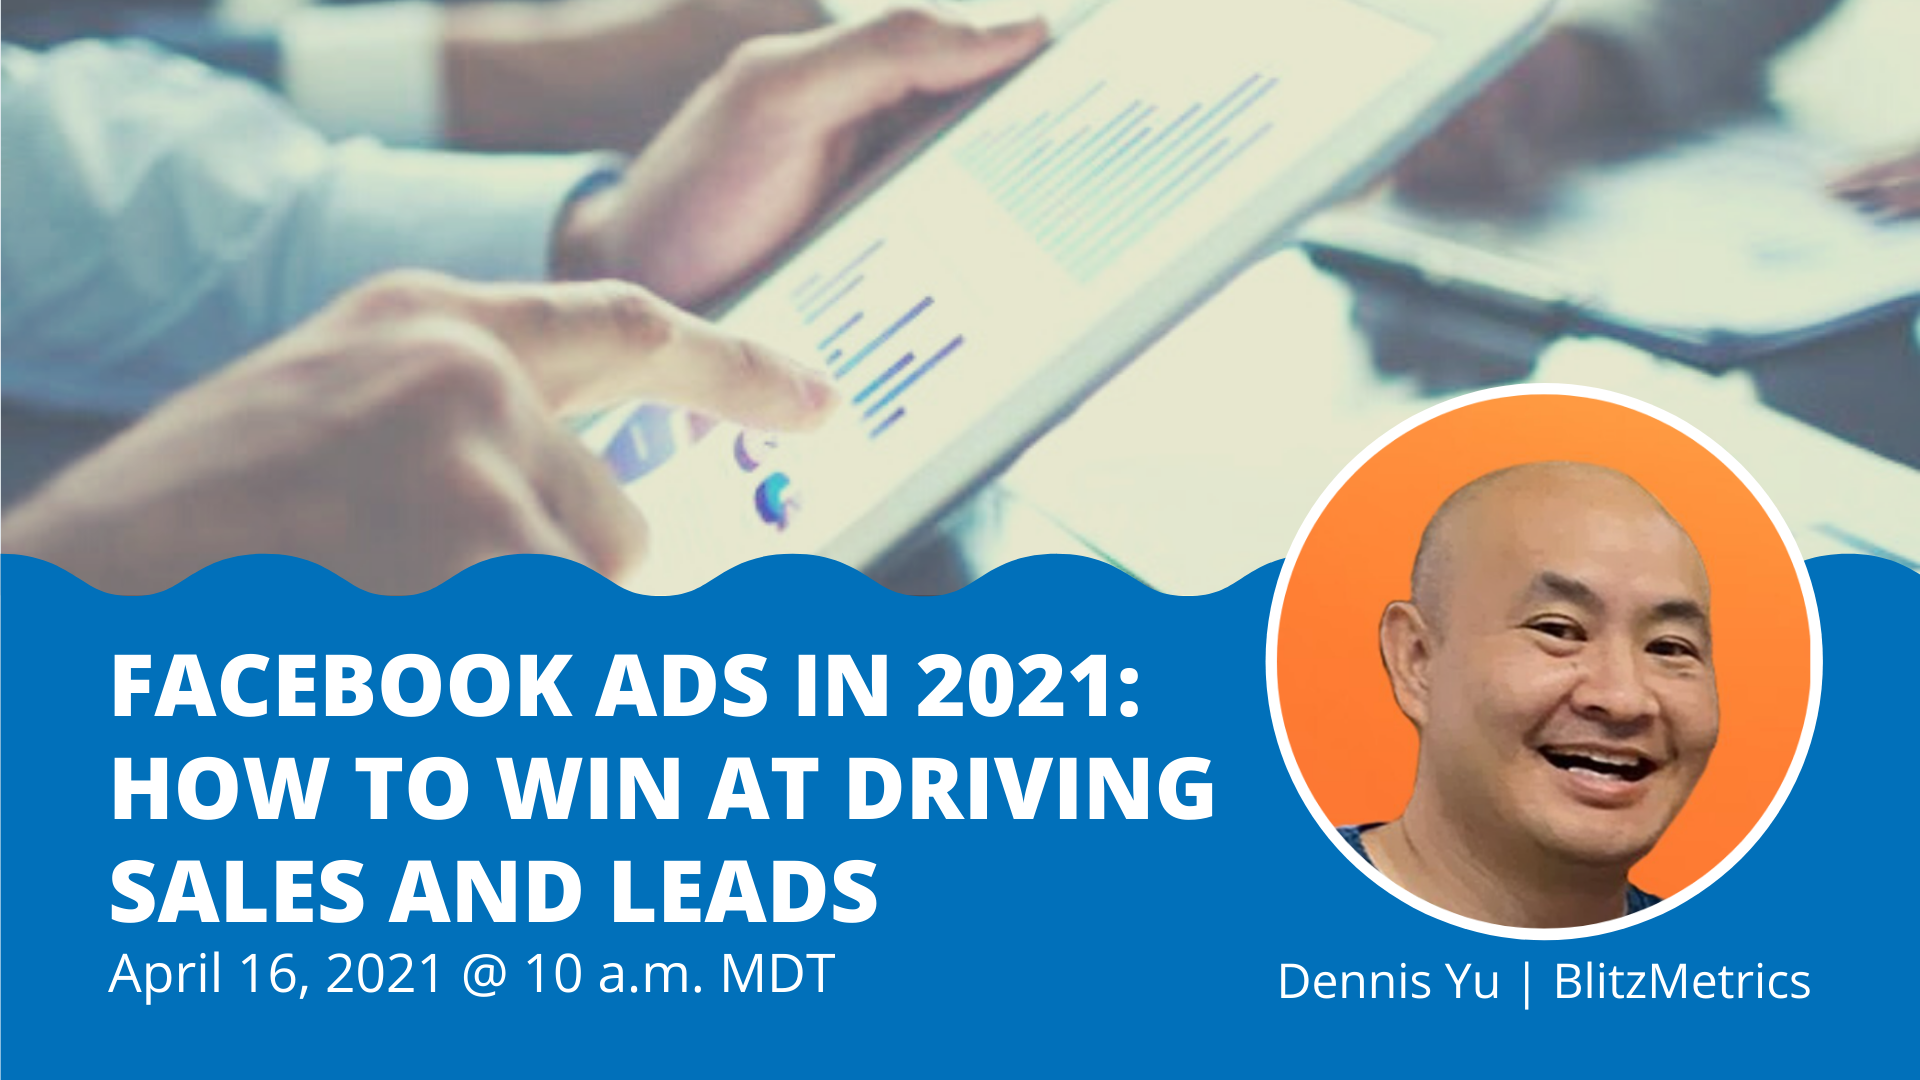 Facebook Ads in 2021: How to Win at Driving Sales and Leads